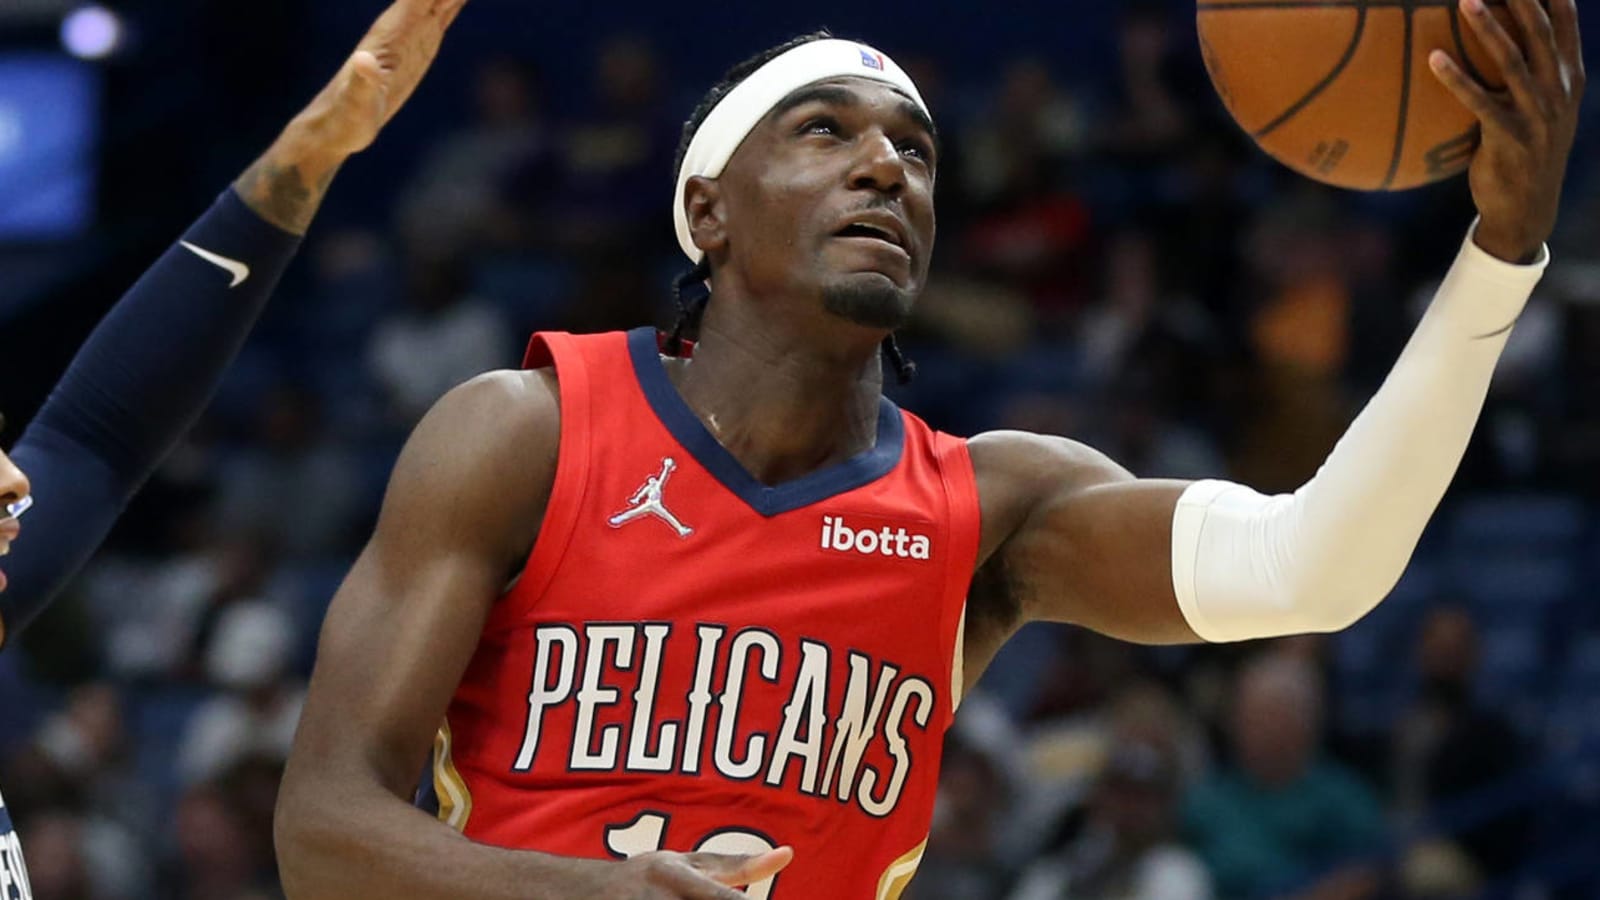 Pelicans' Kira Lewis Jr. out for season with torn ACL